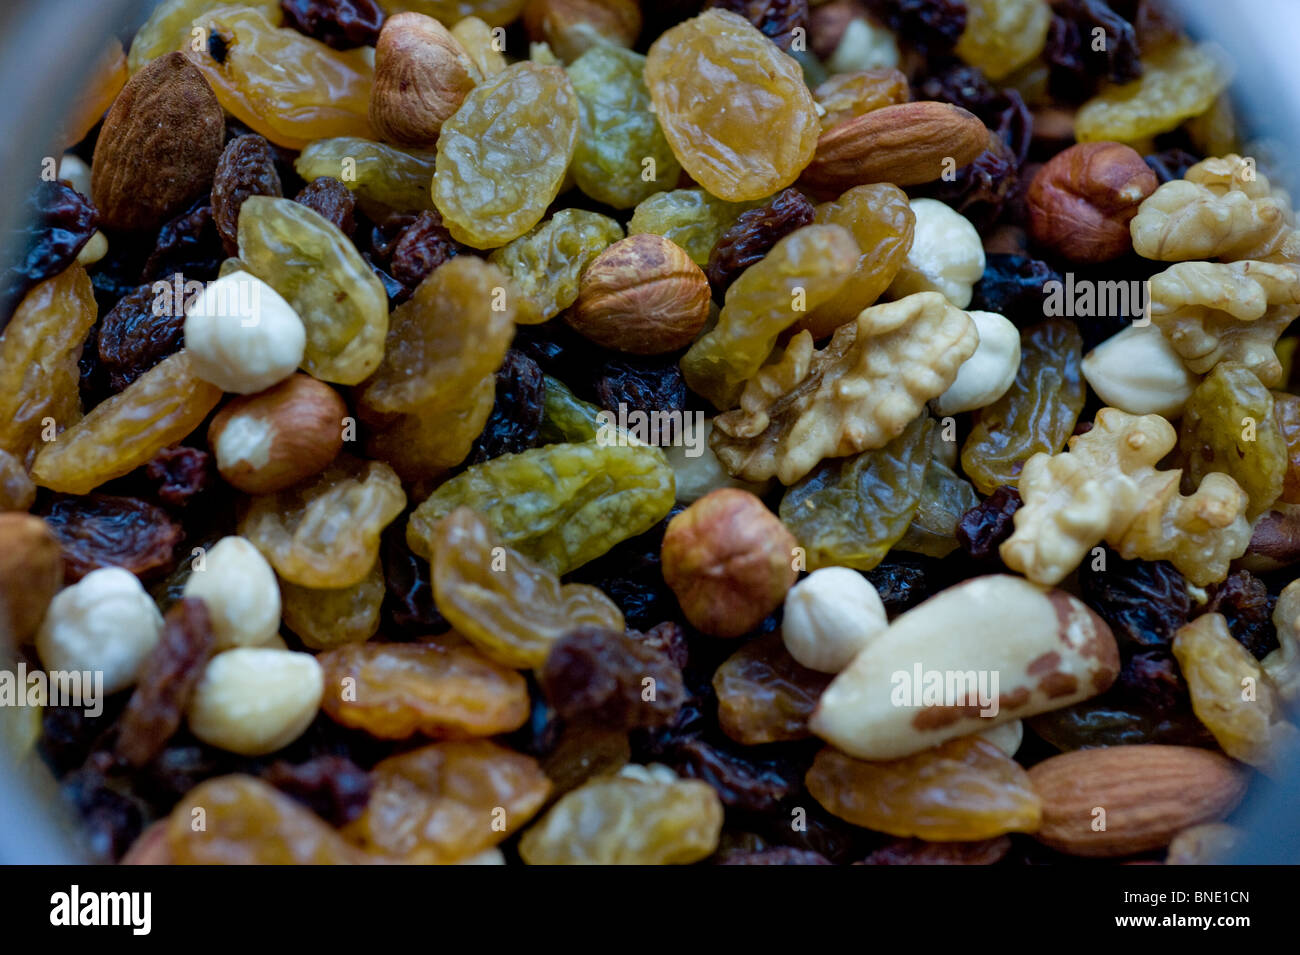 Mixed dried fruit and nuts Stock Photo